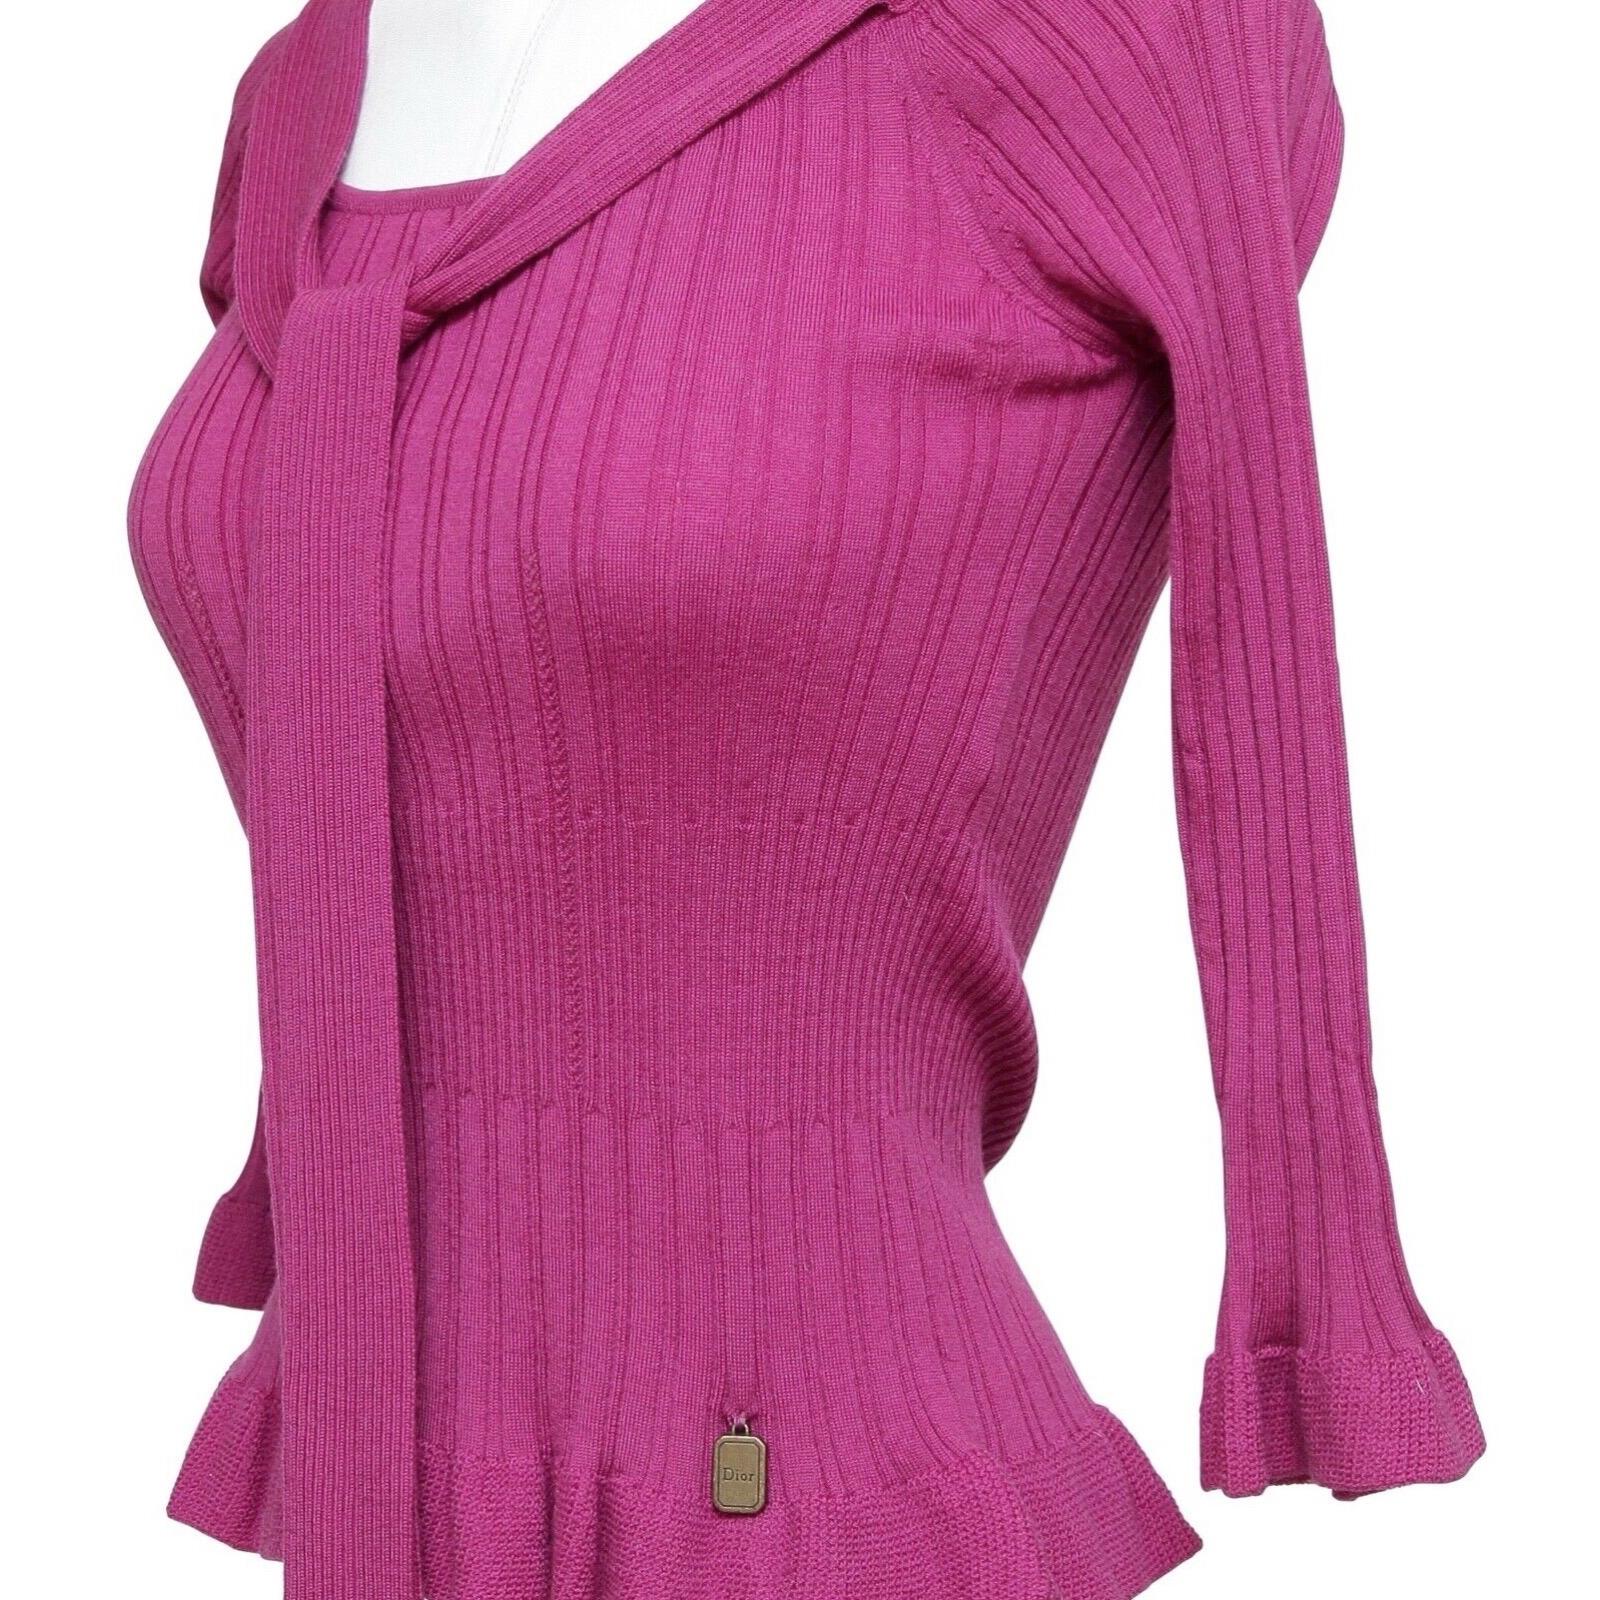 Pink CHRISTIAN DIOR Sweater Knit Top Magenta Scoop Neck Tie 3/4 Sleeve Sz 36 4 For Sale